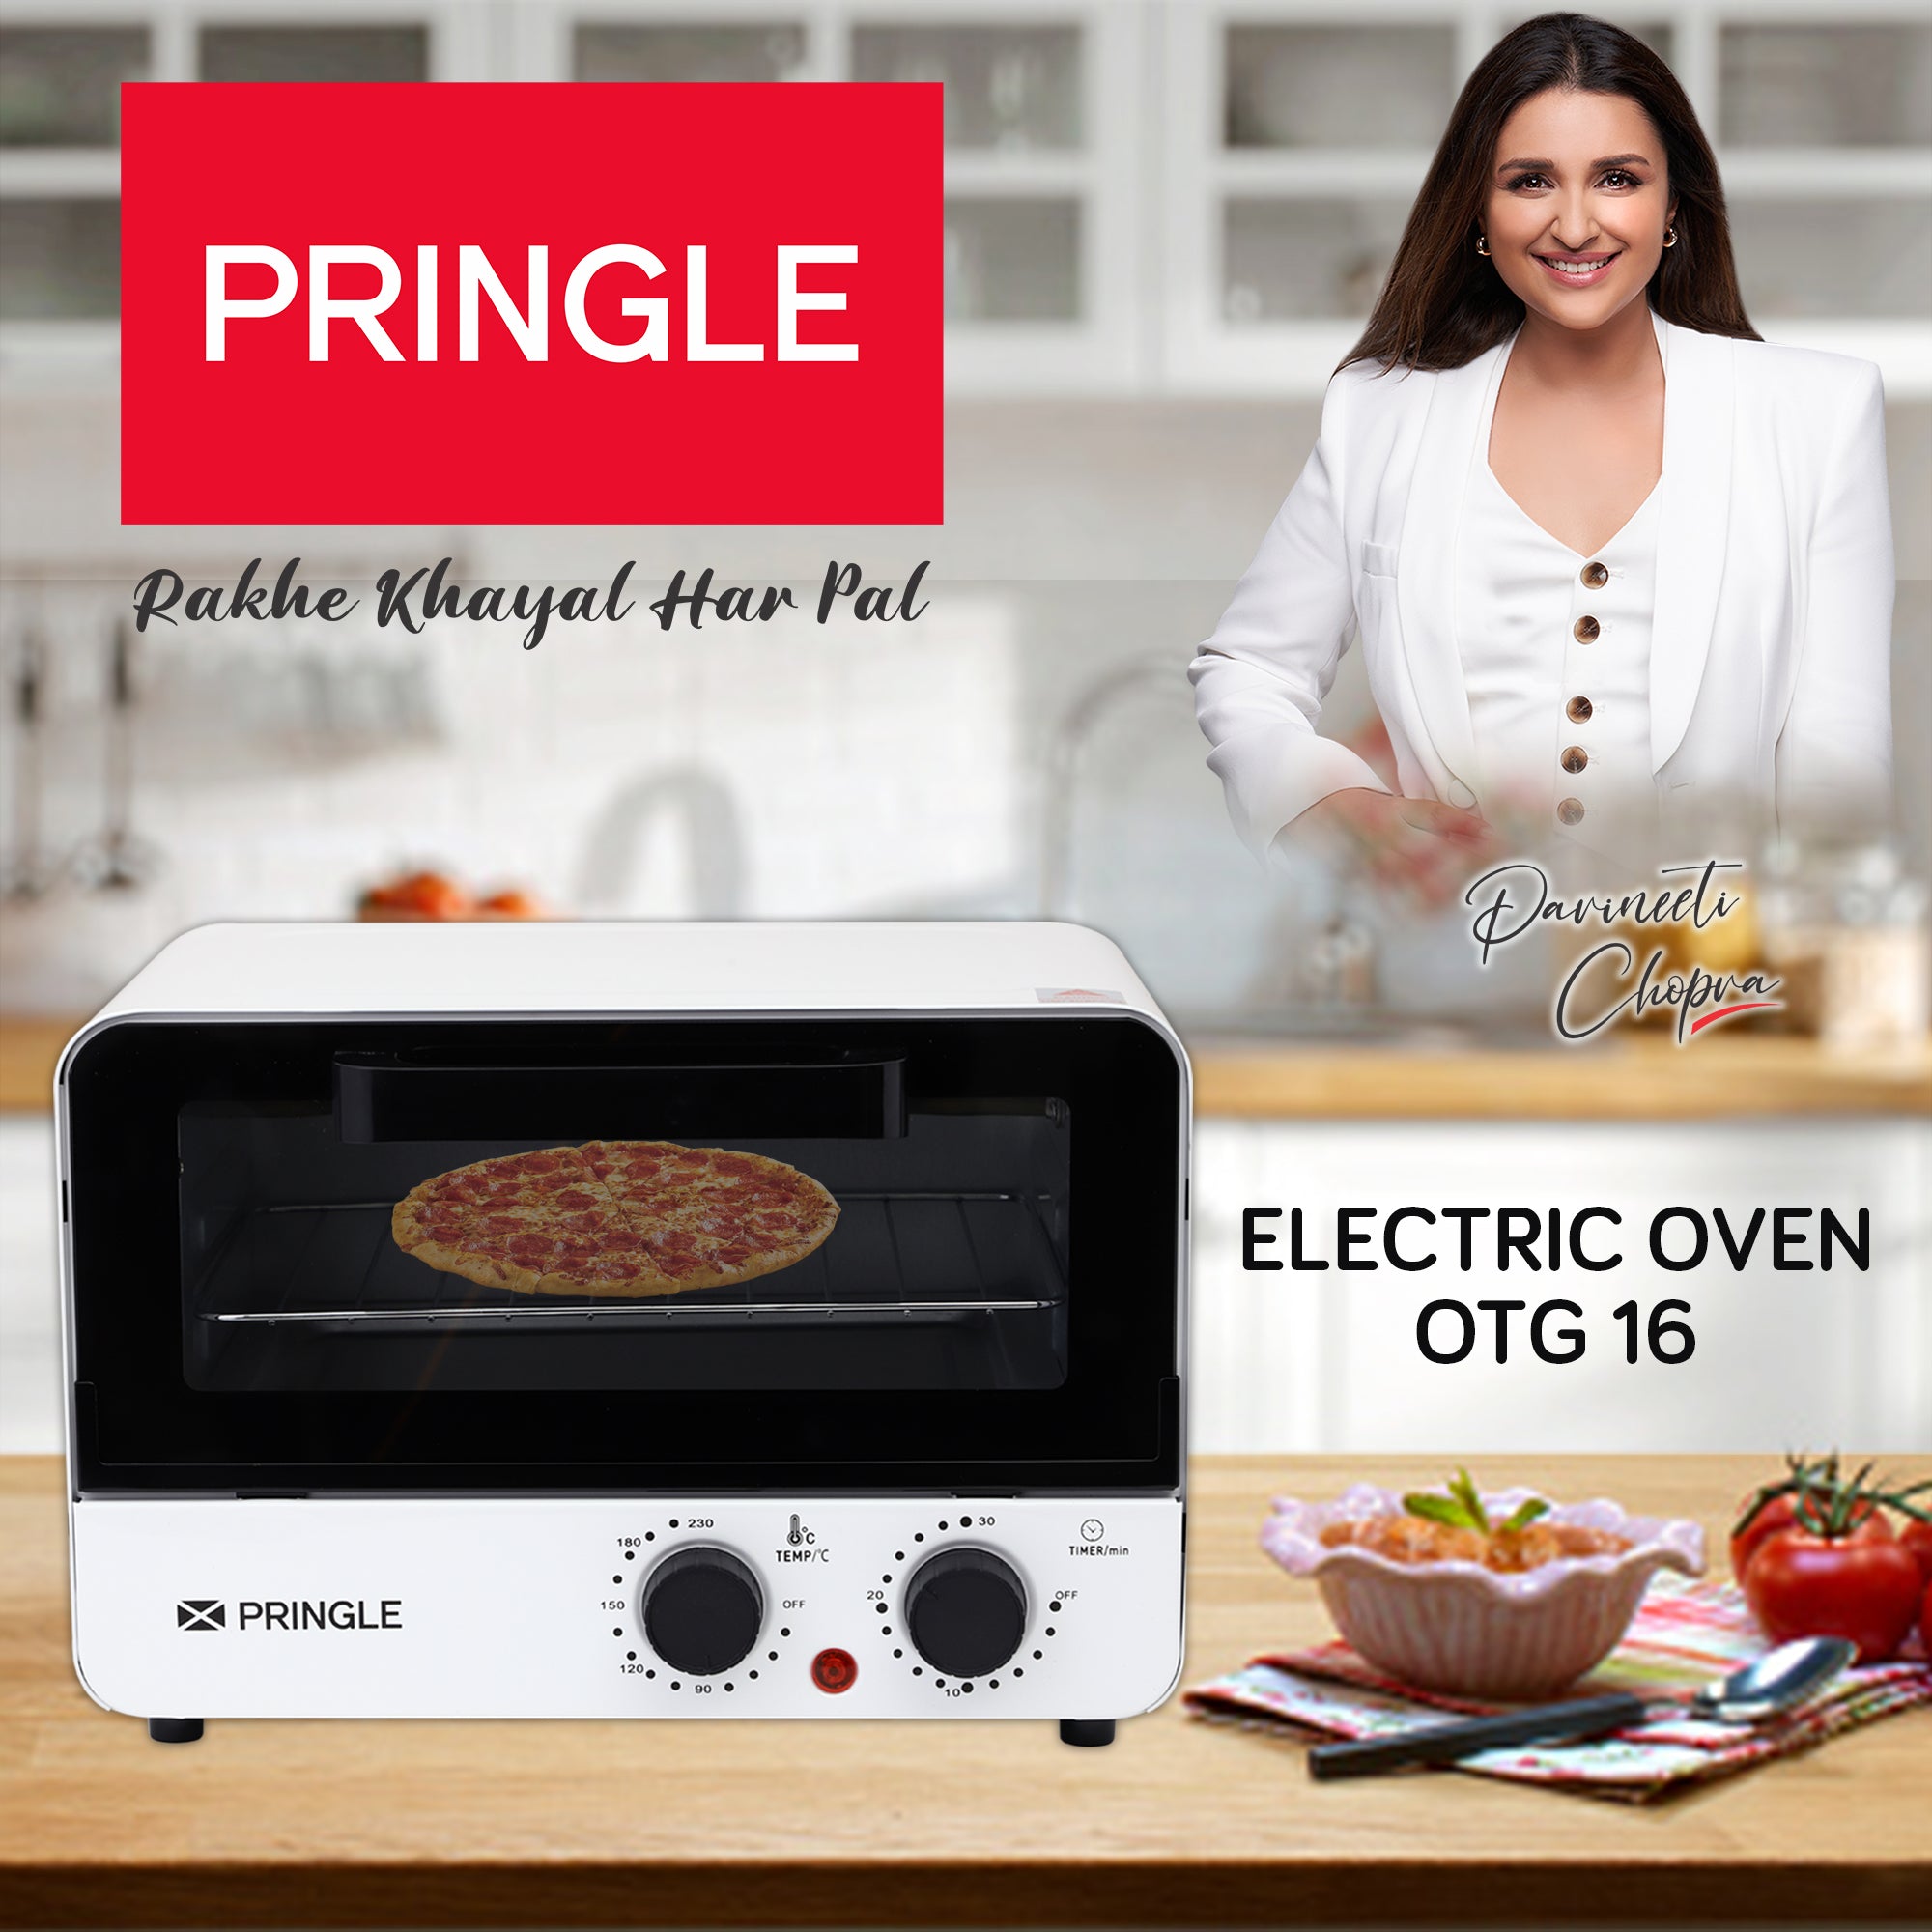 Pringle Oven Toaster Griller (OTG)16 - 12 White And Black - with Rotisserie, Auto-Shut Off, Heat-Resistant Tempered Glass, Multi-Stage Heat Selection 1000Watt - Pringle Appliances